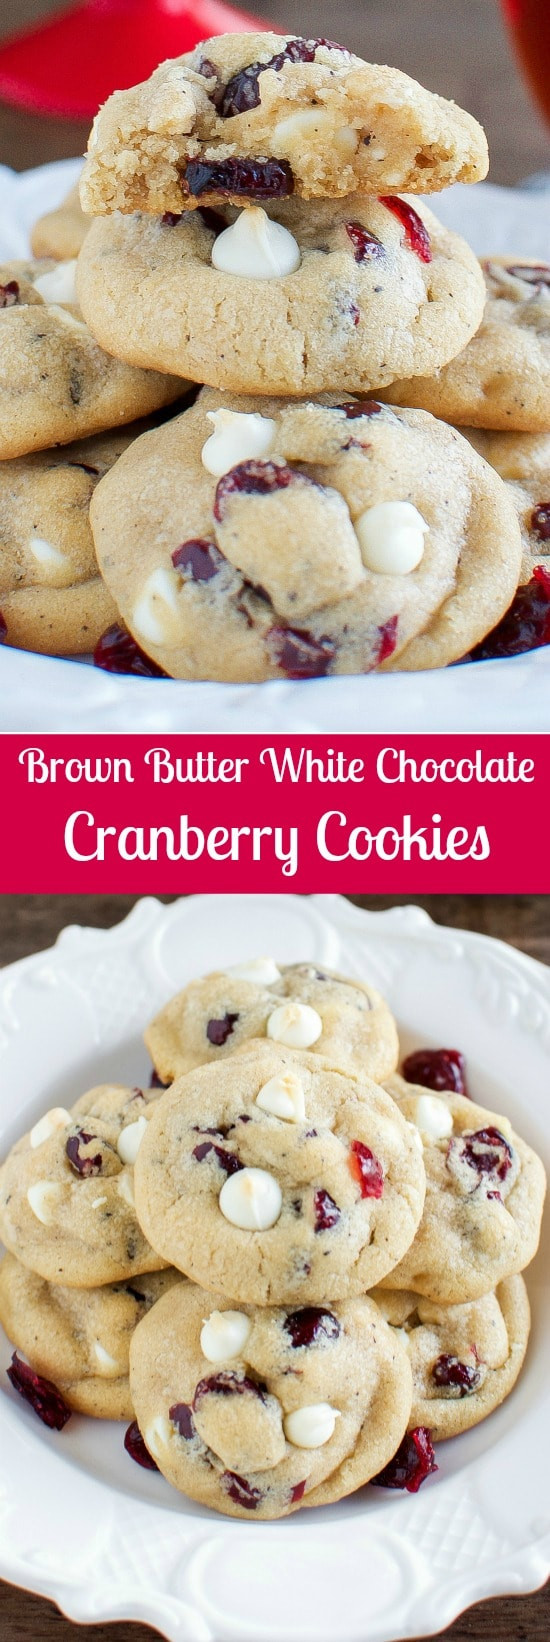 Cranberry Christmas Cookies
 Best White Chocolate Cranberry Cookies Back for Seconds